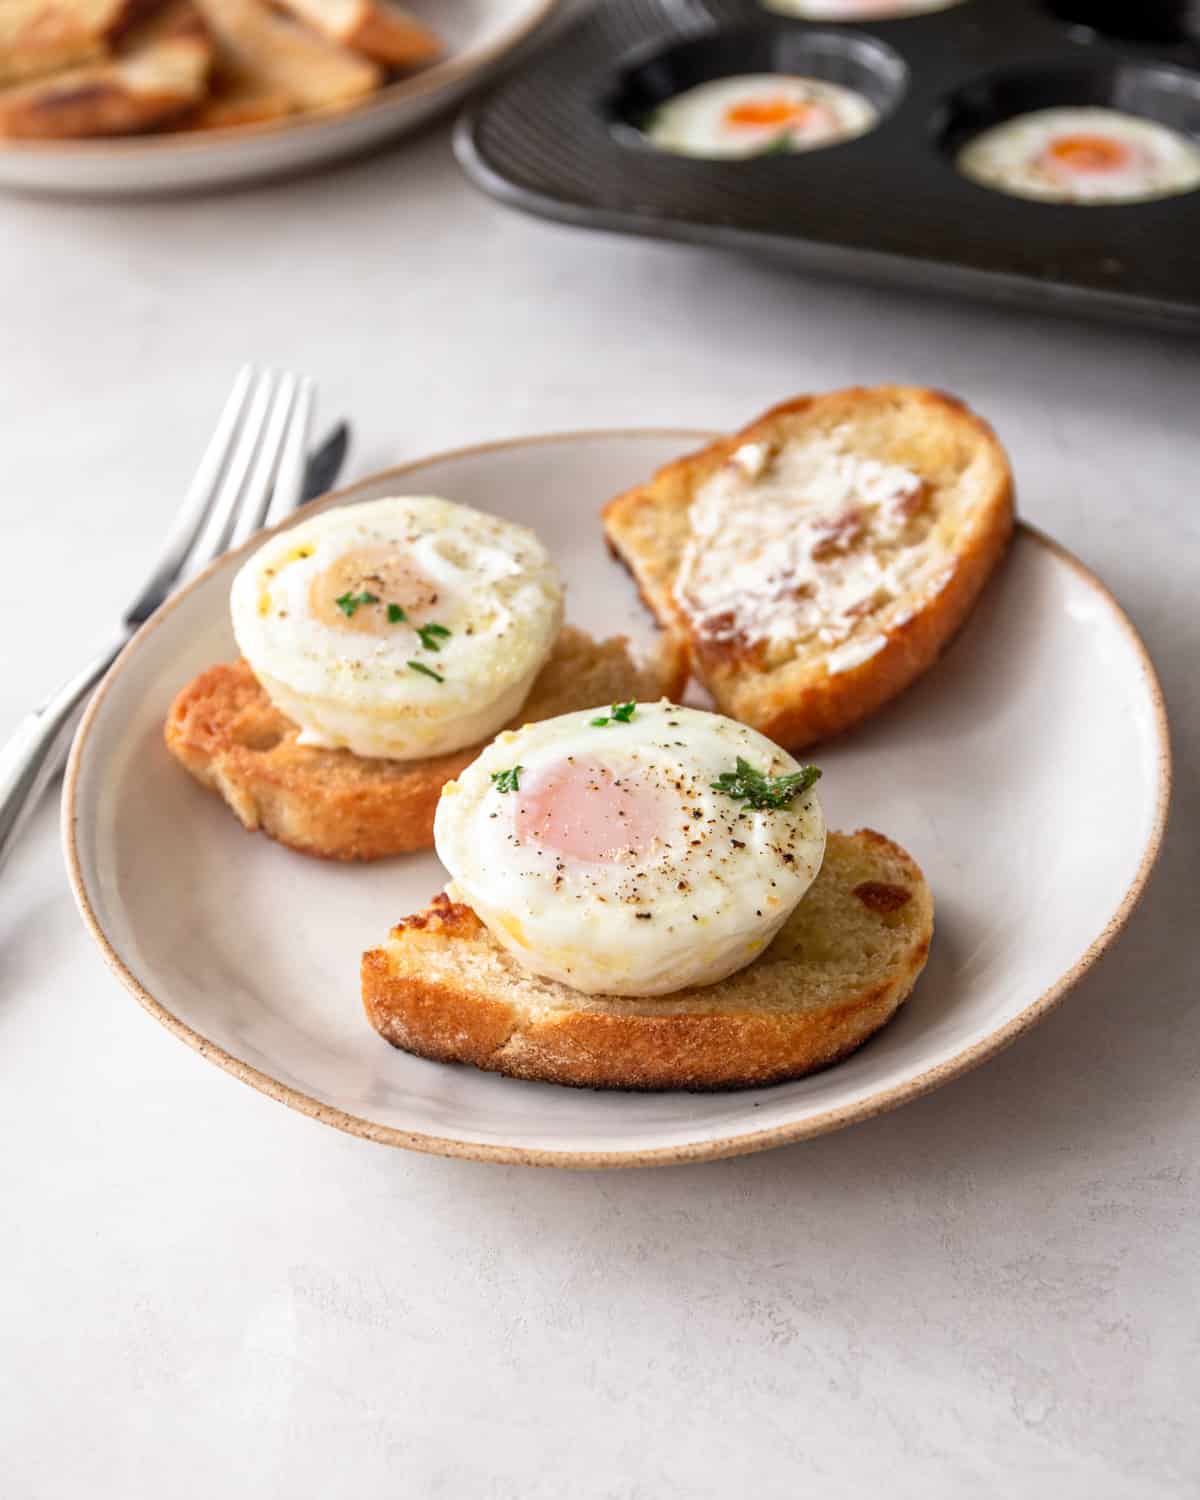 muffin pan baked eggs on toast